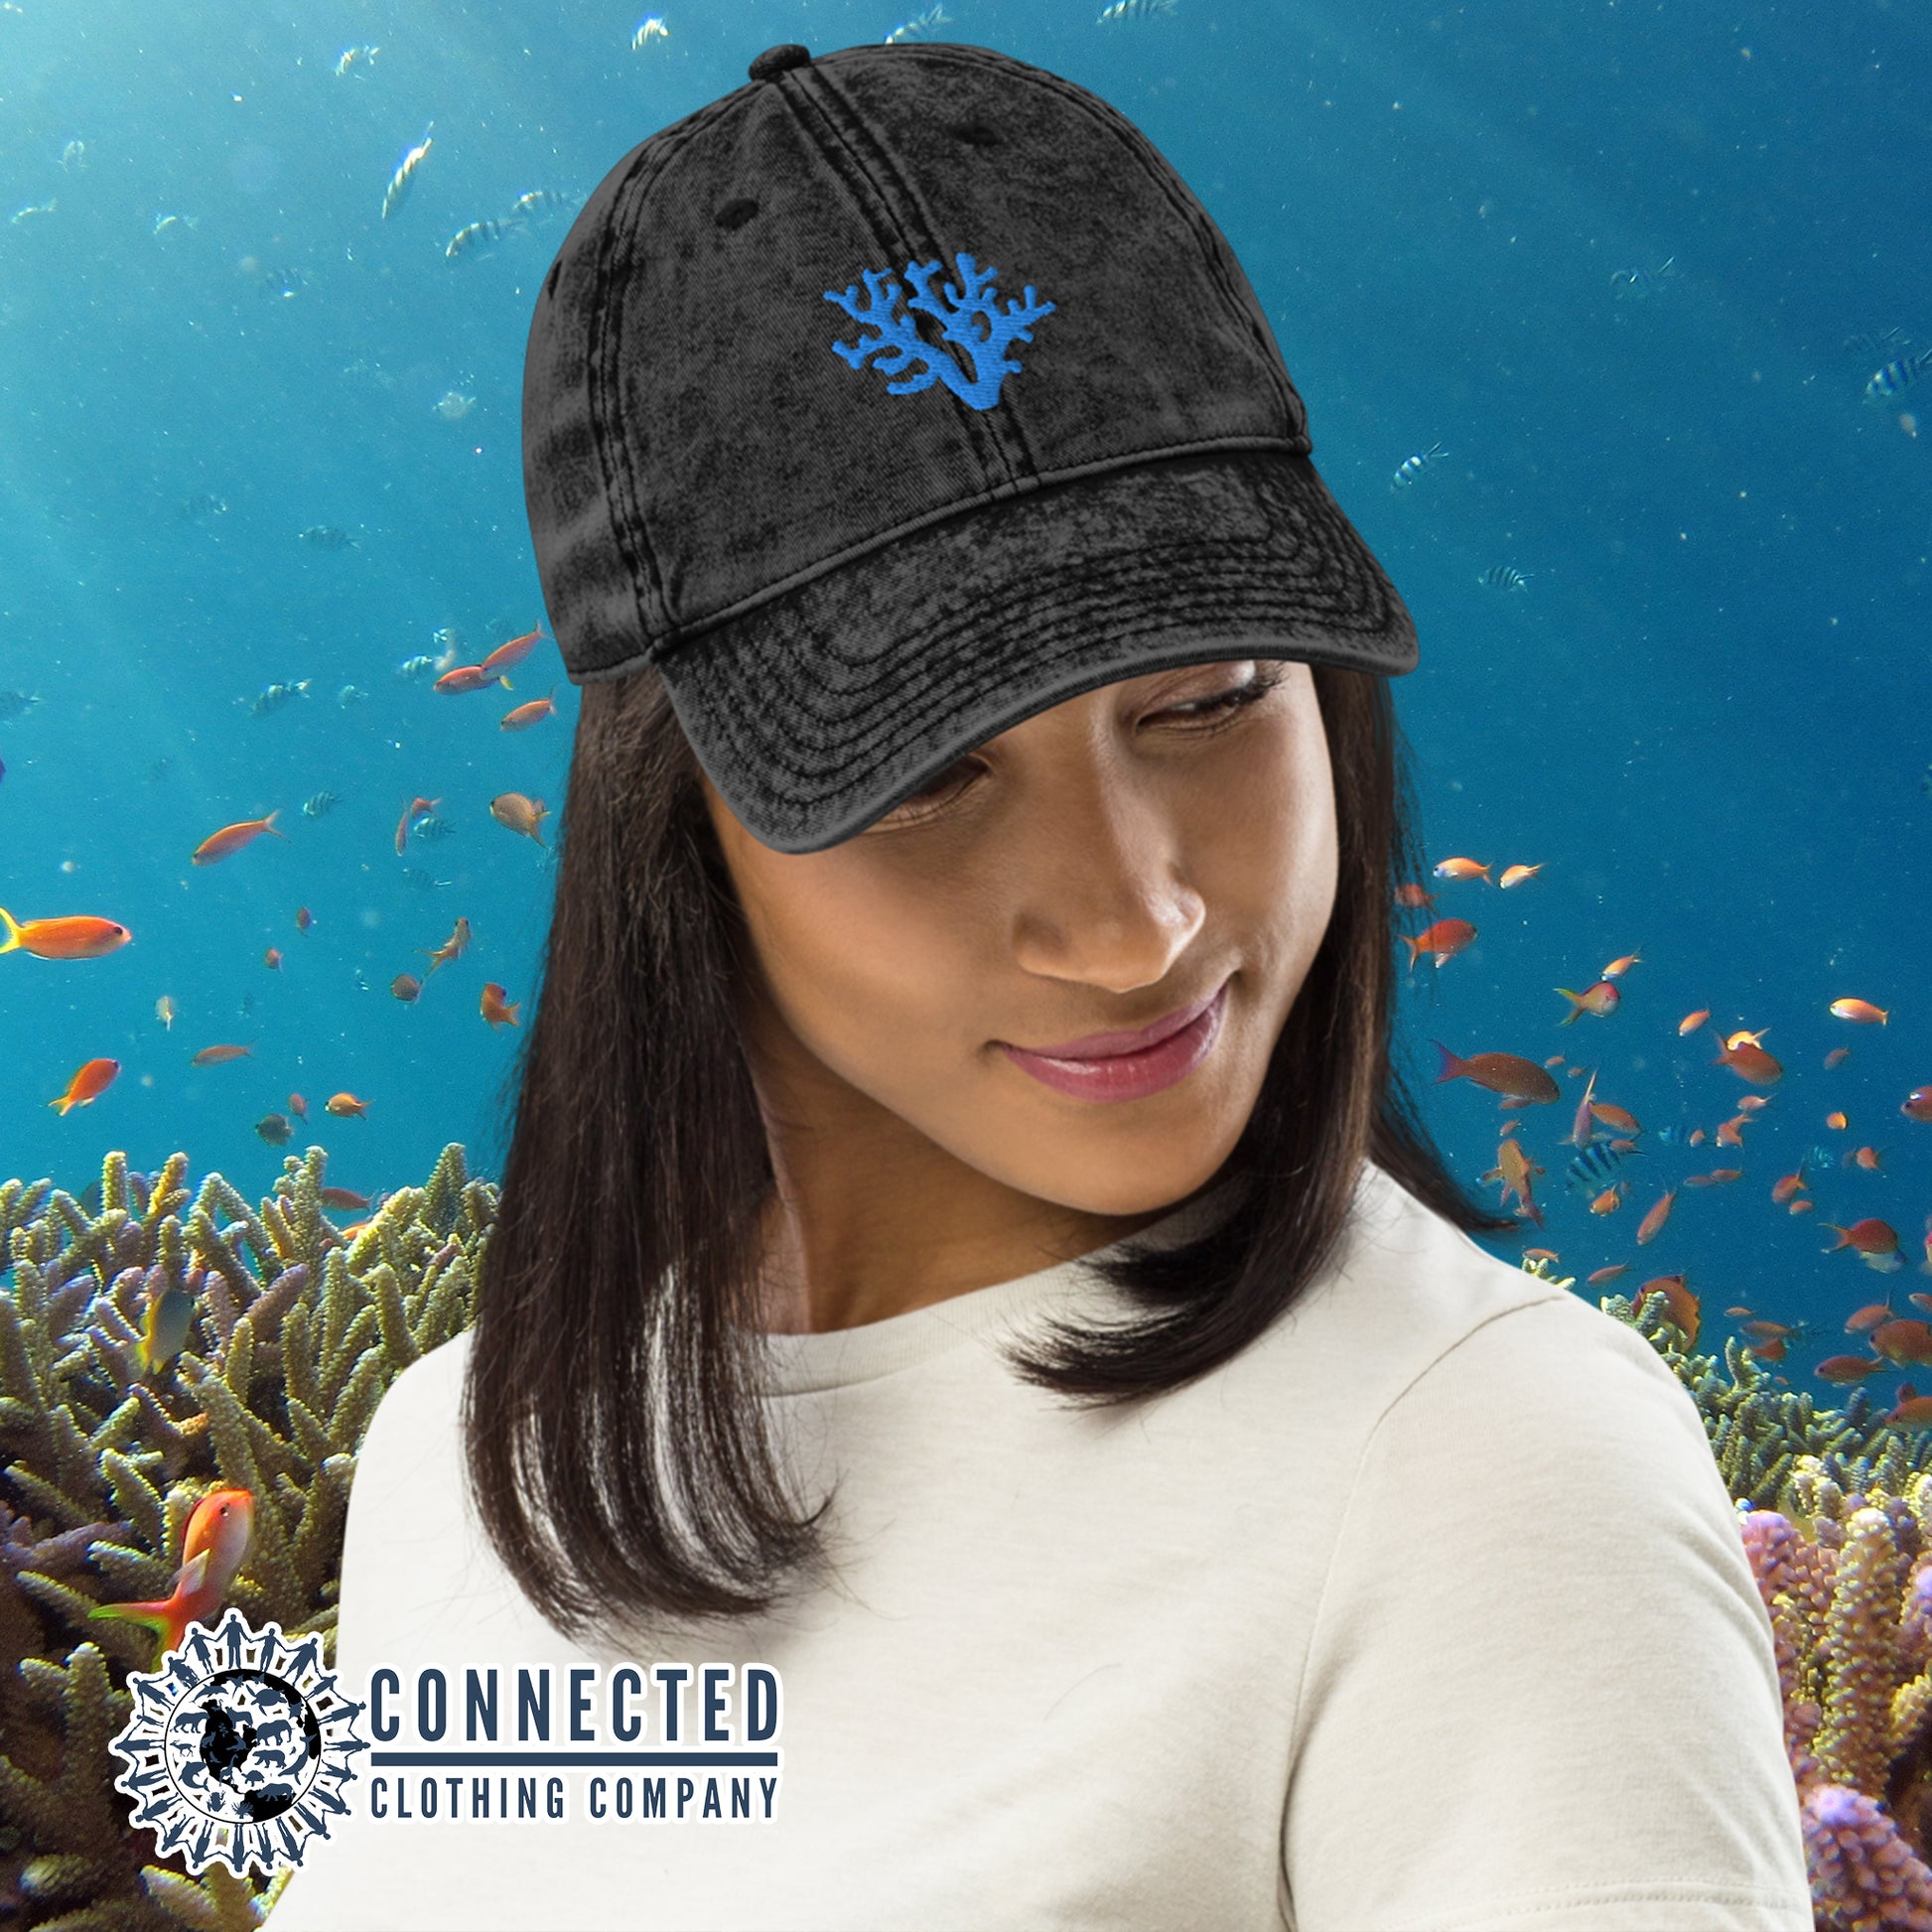 Model Wearing Black Coral Vintage Cotton Cap - Connected Clothing Company - Ethically and Sustainably Made - 10% donated to Mission Blue ocean conservation